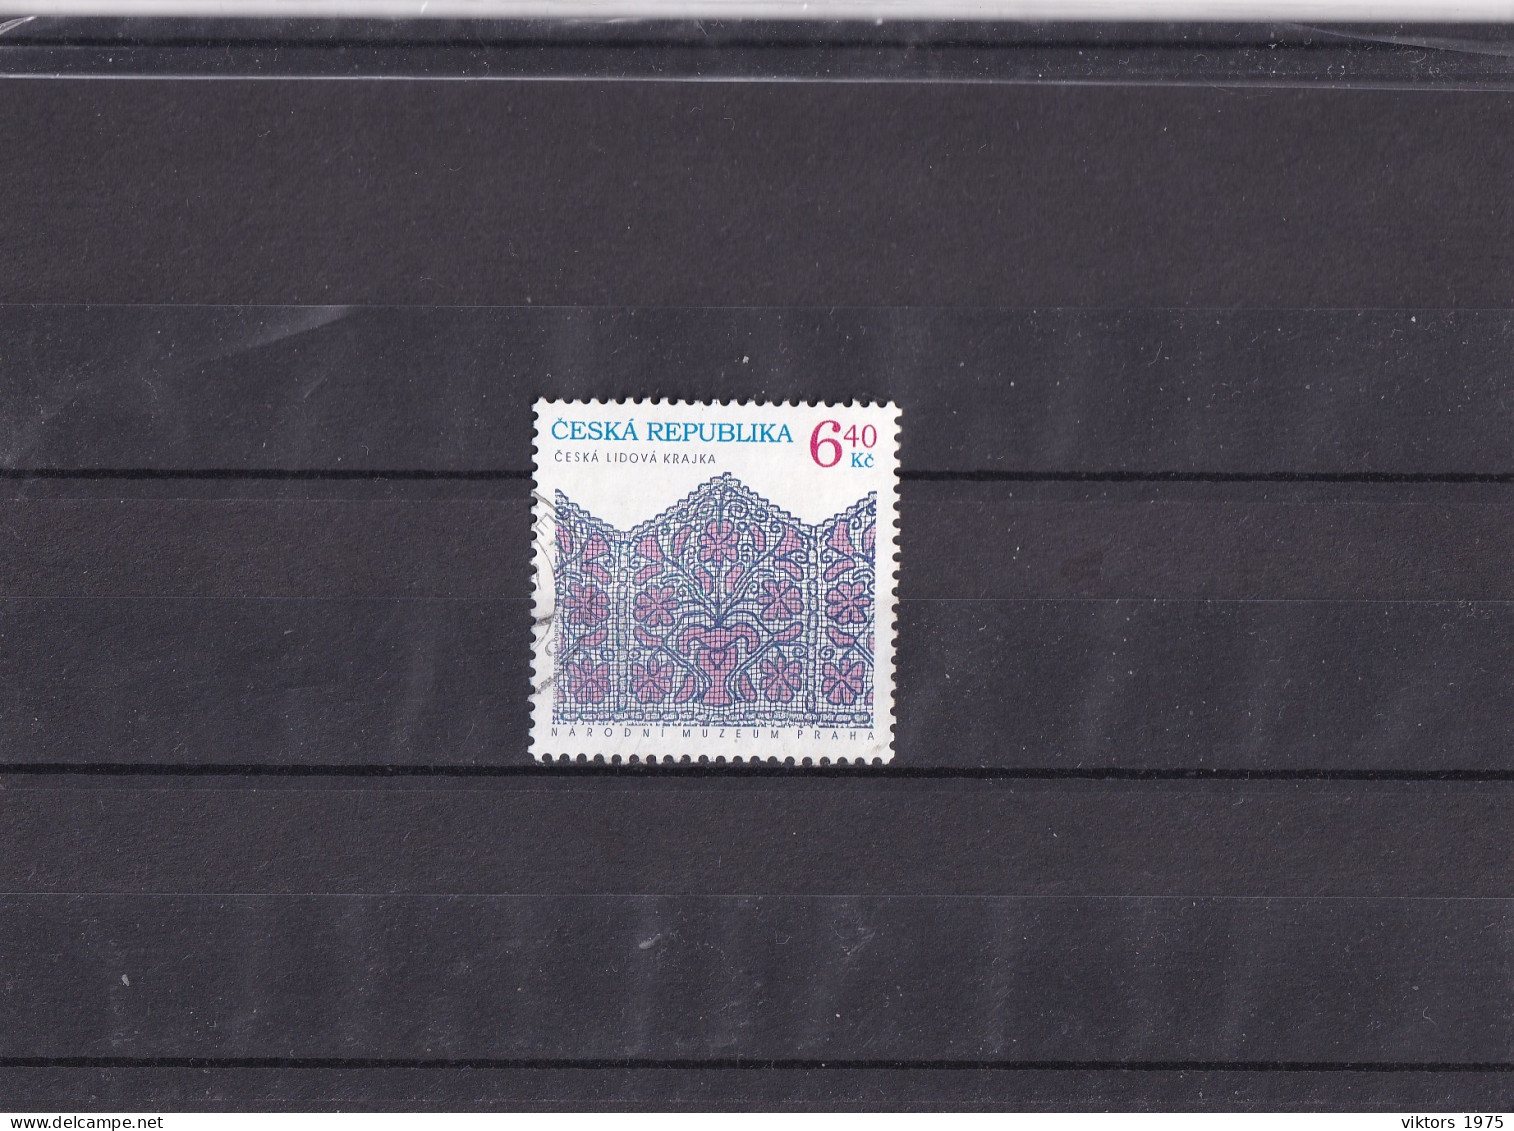 Used Stamp Nr.351 In MICHEL Catalog - Used Stamps